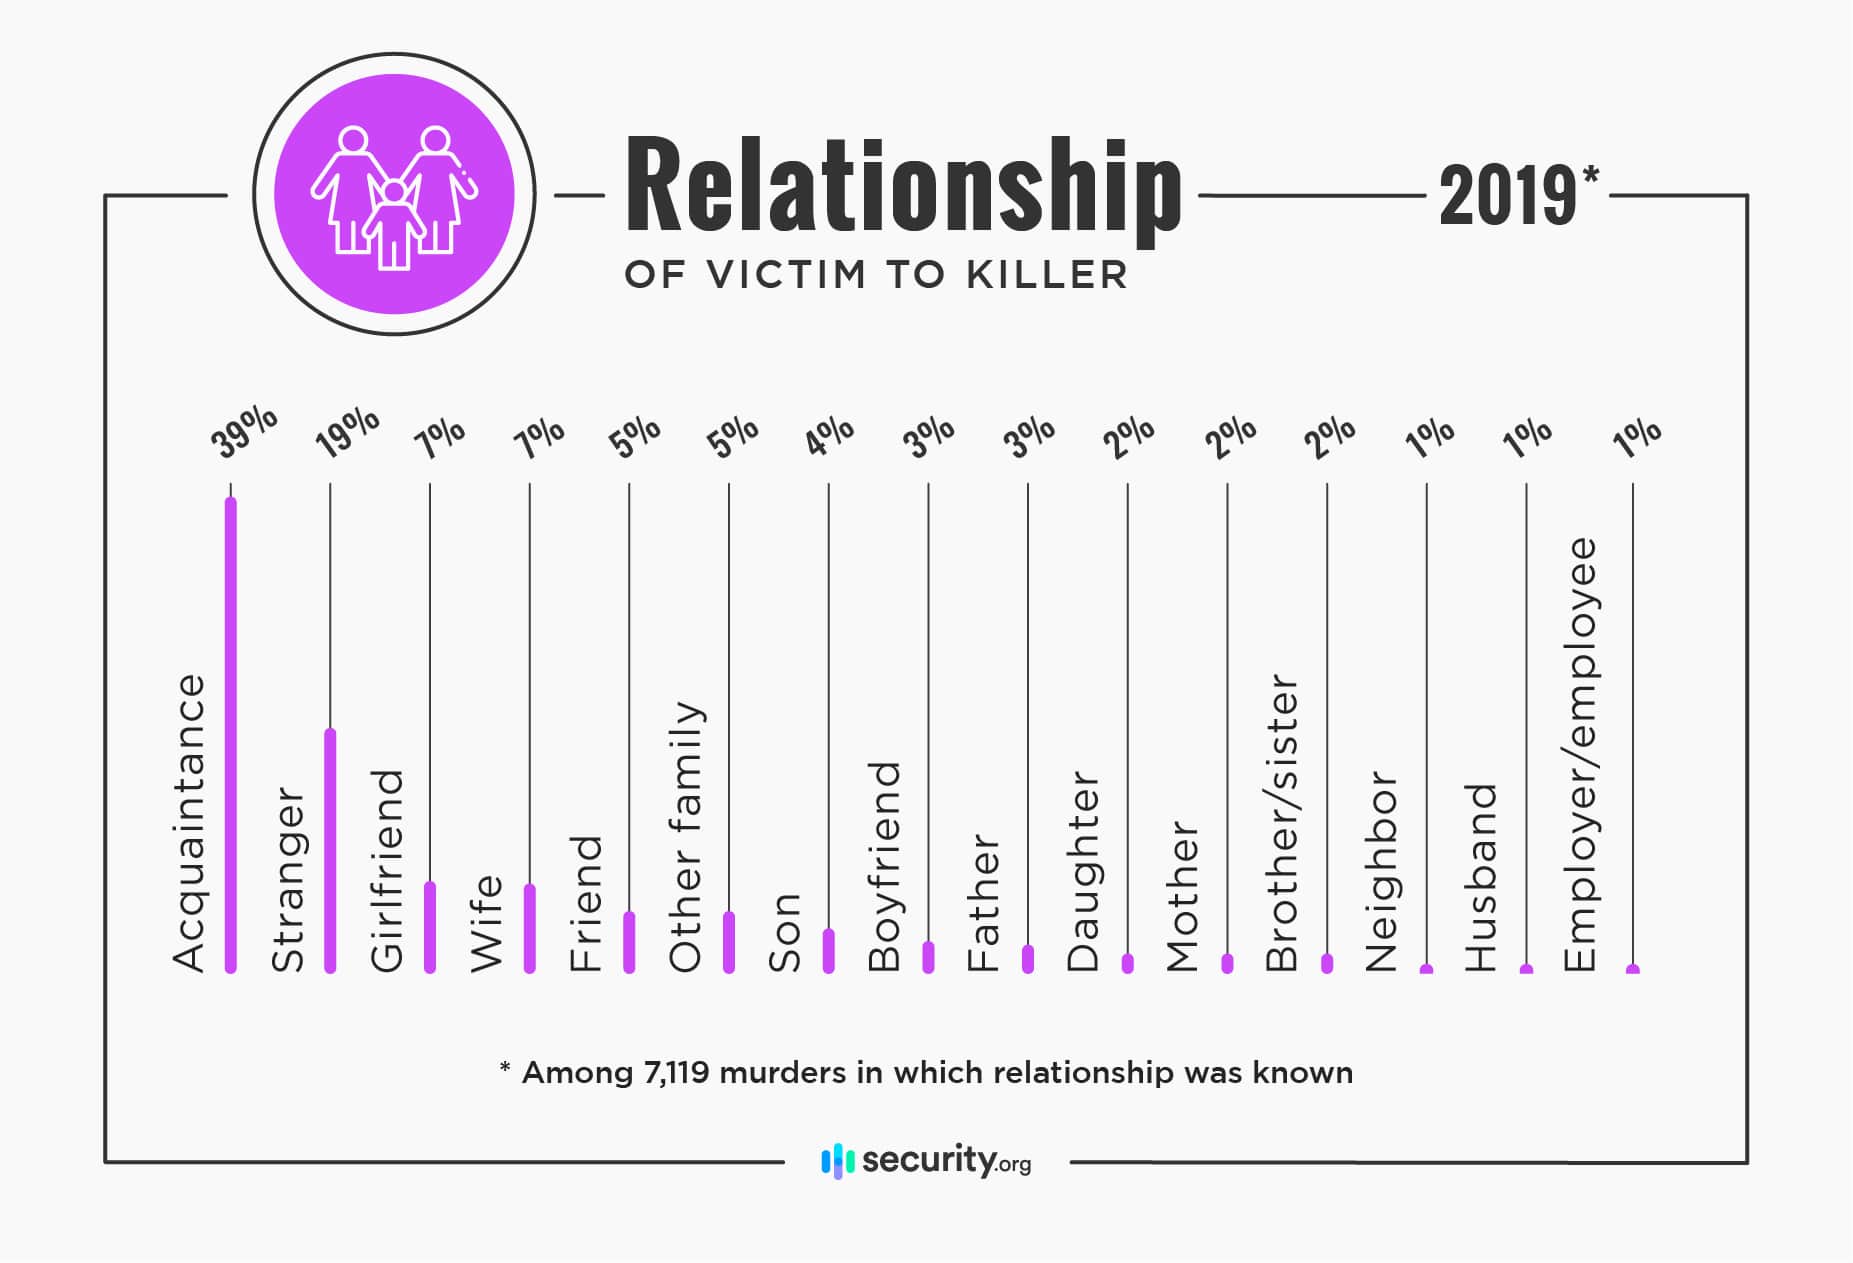 Relationship of victim to killer in 2019